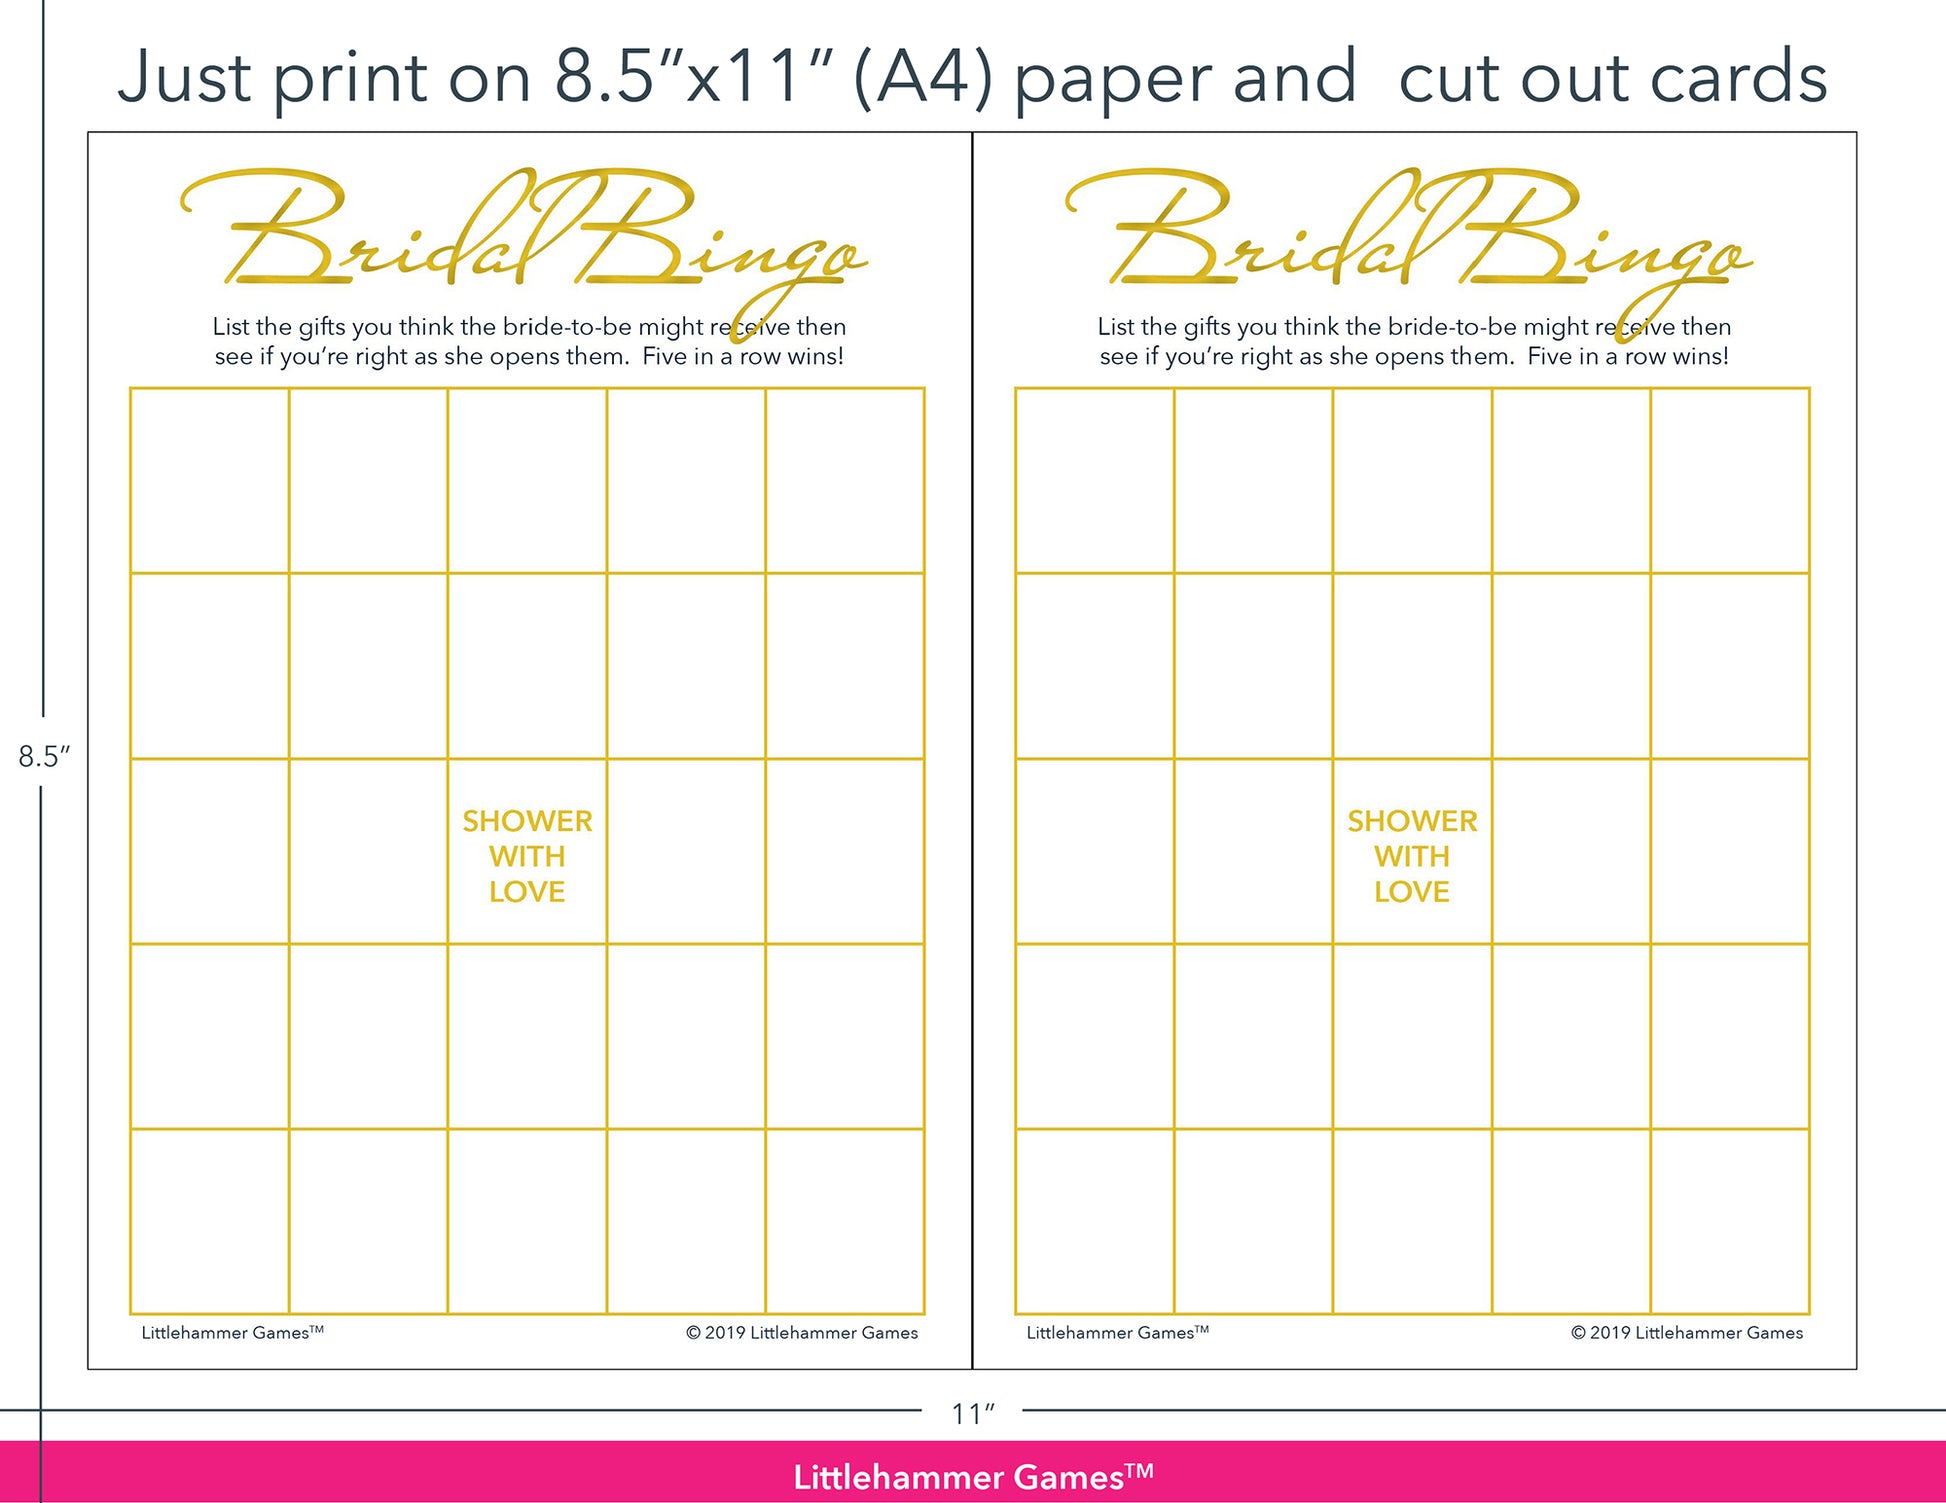 Gold and white Bridal Gift Bingo game cards with printing instructions